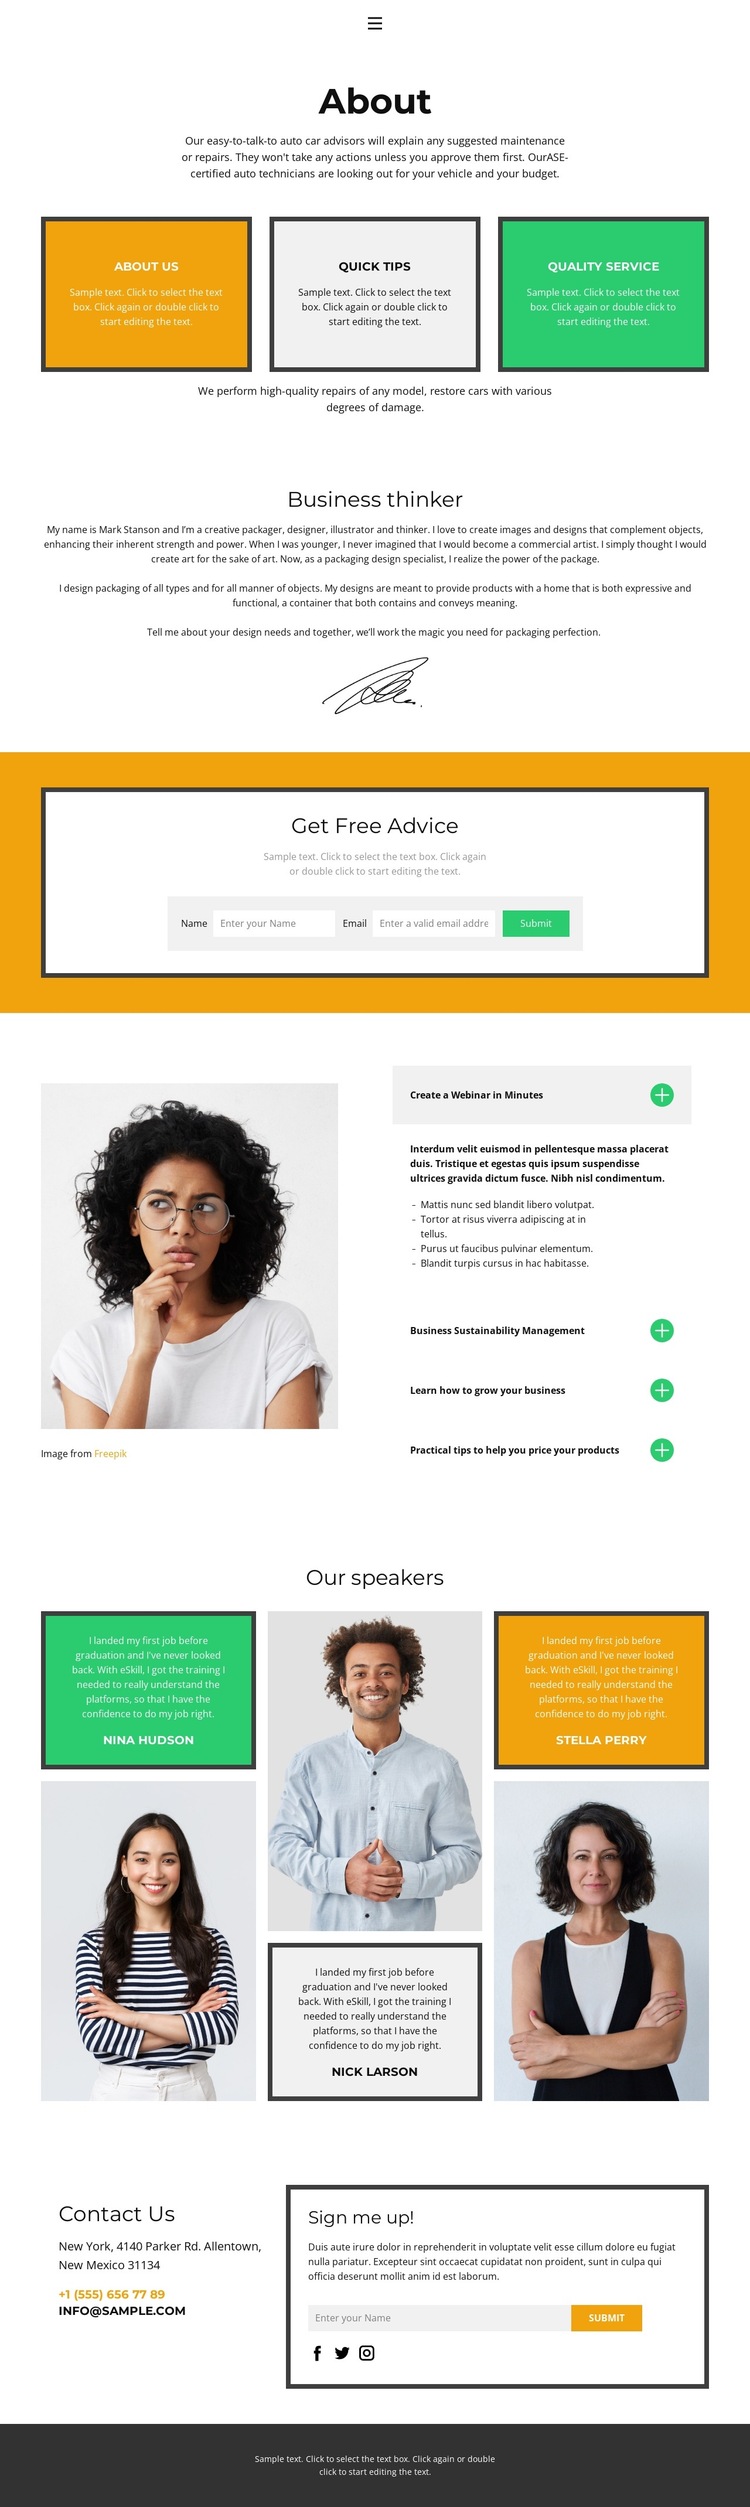 Read and find answers HTML5 Template